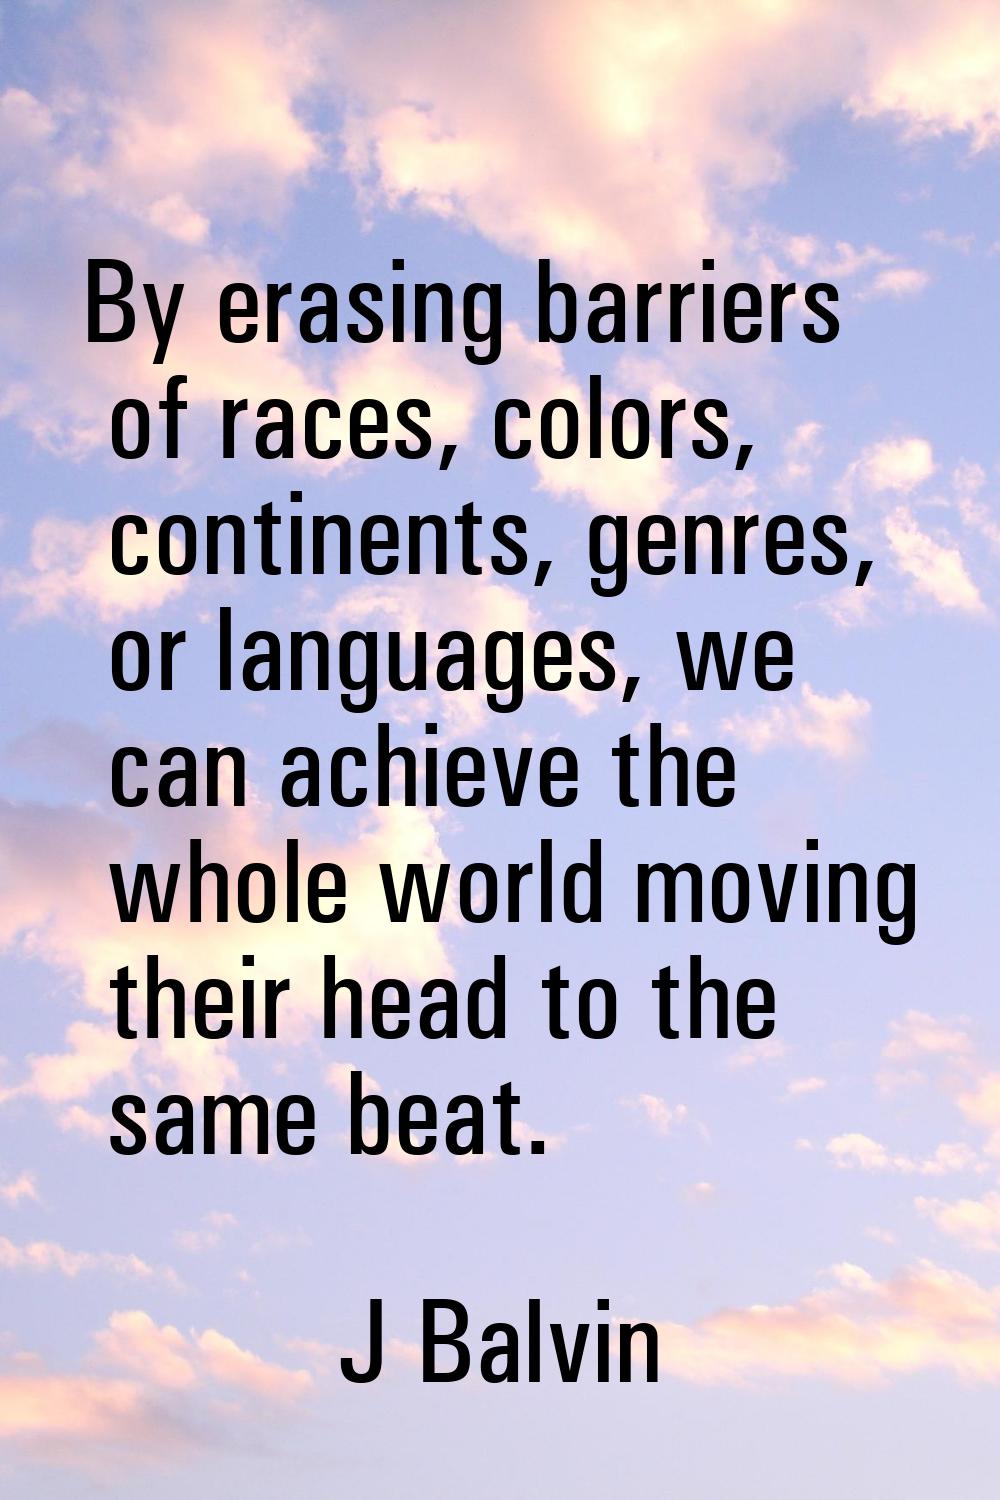 By erasing barriers of races, colors, continents, genres, or languages, we can achieve the whole wo